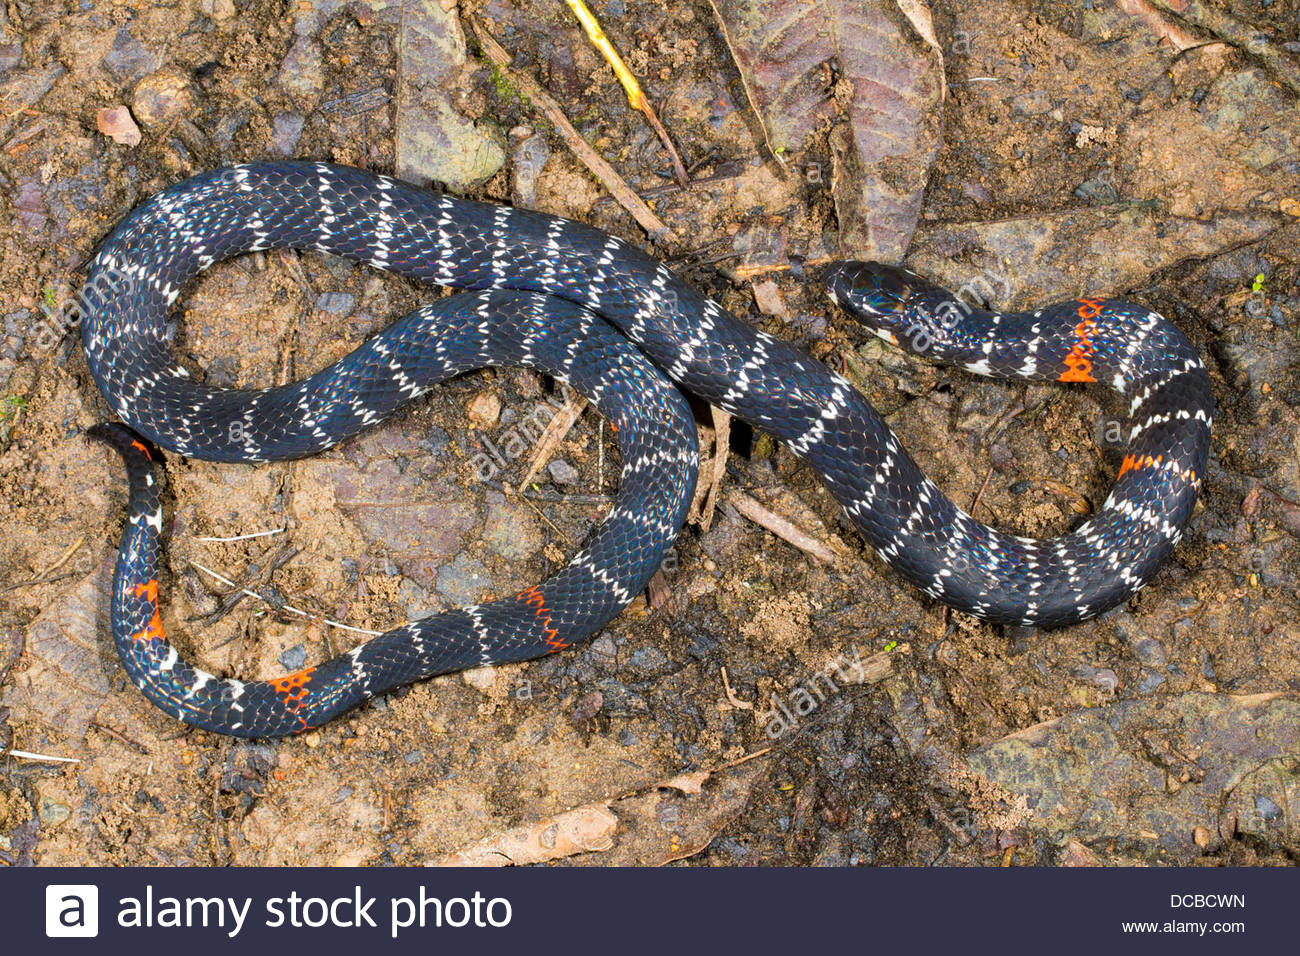 False Coral Snake clipart #1, Download drawings